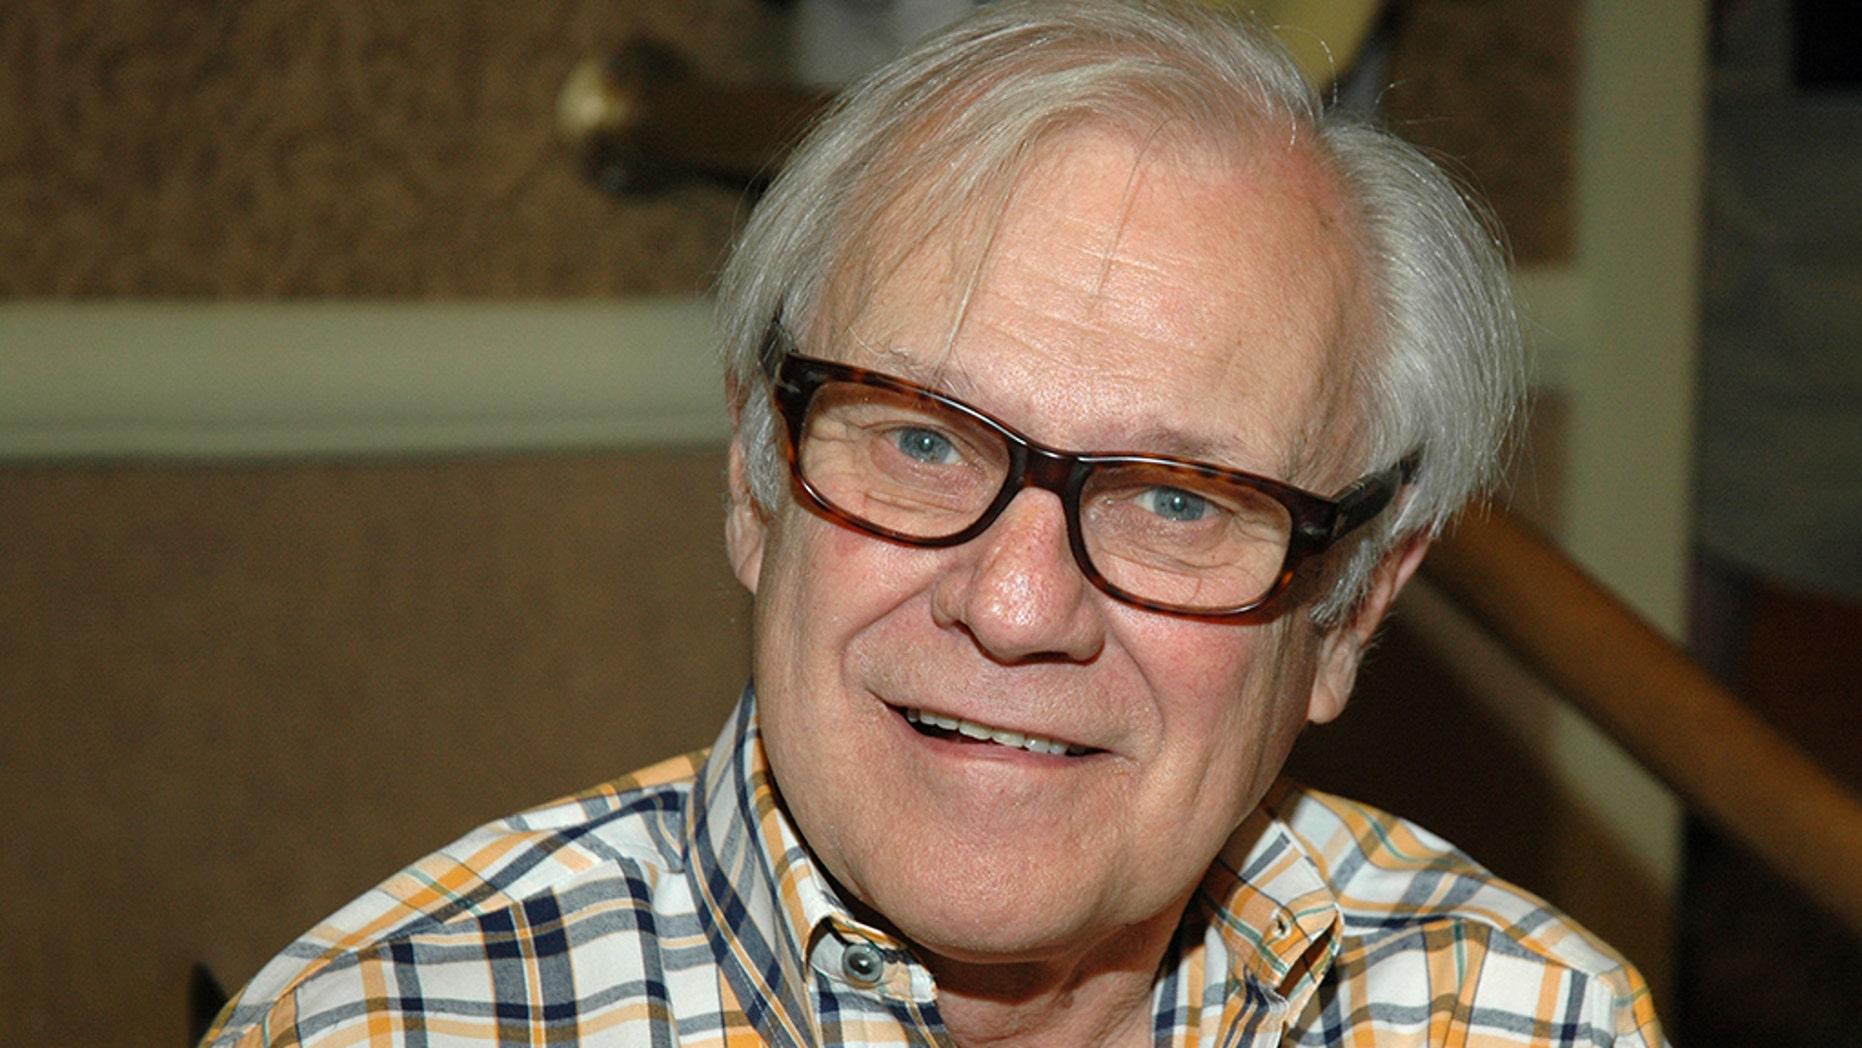 Ken Kercheval, known for his role as Cliff Barnes in the CBS series 